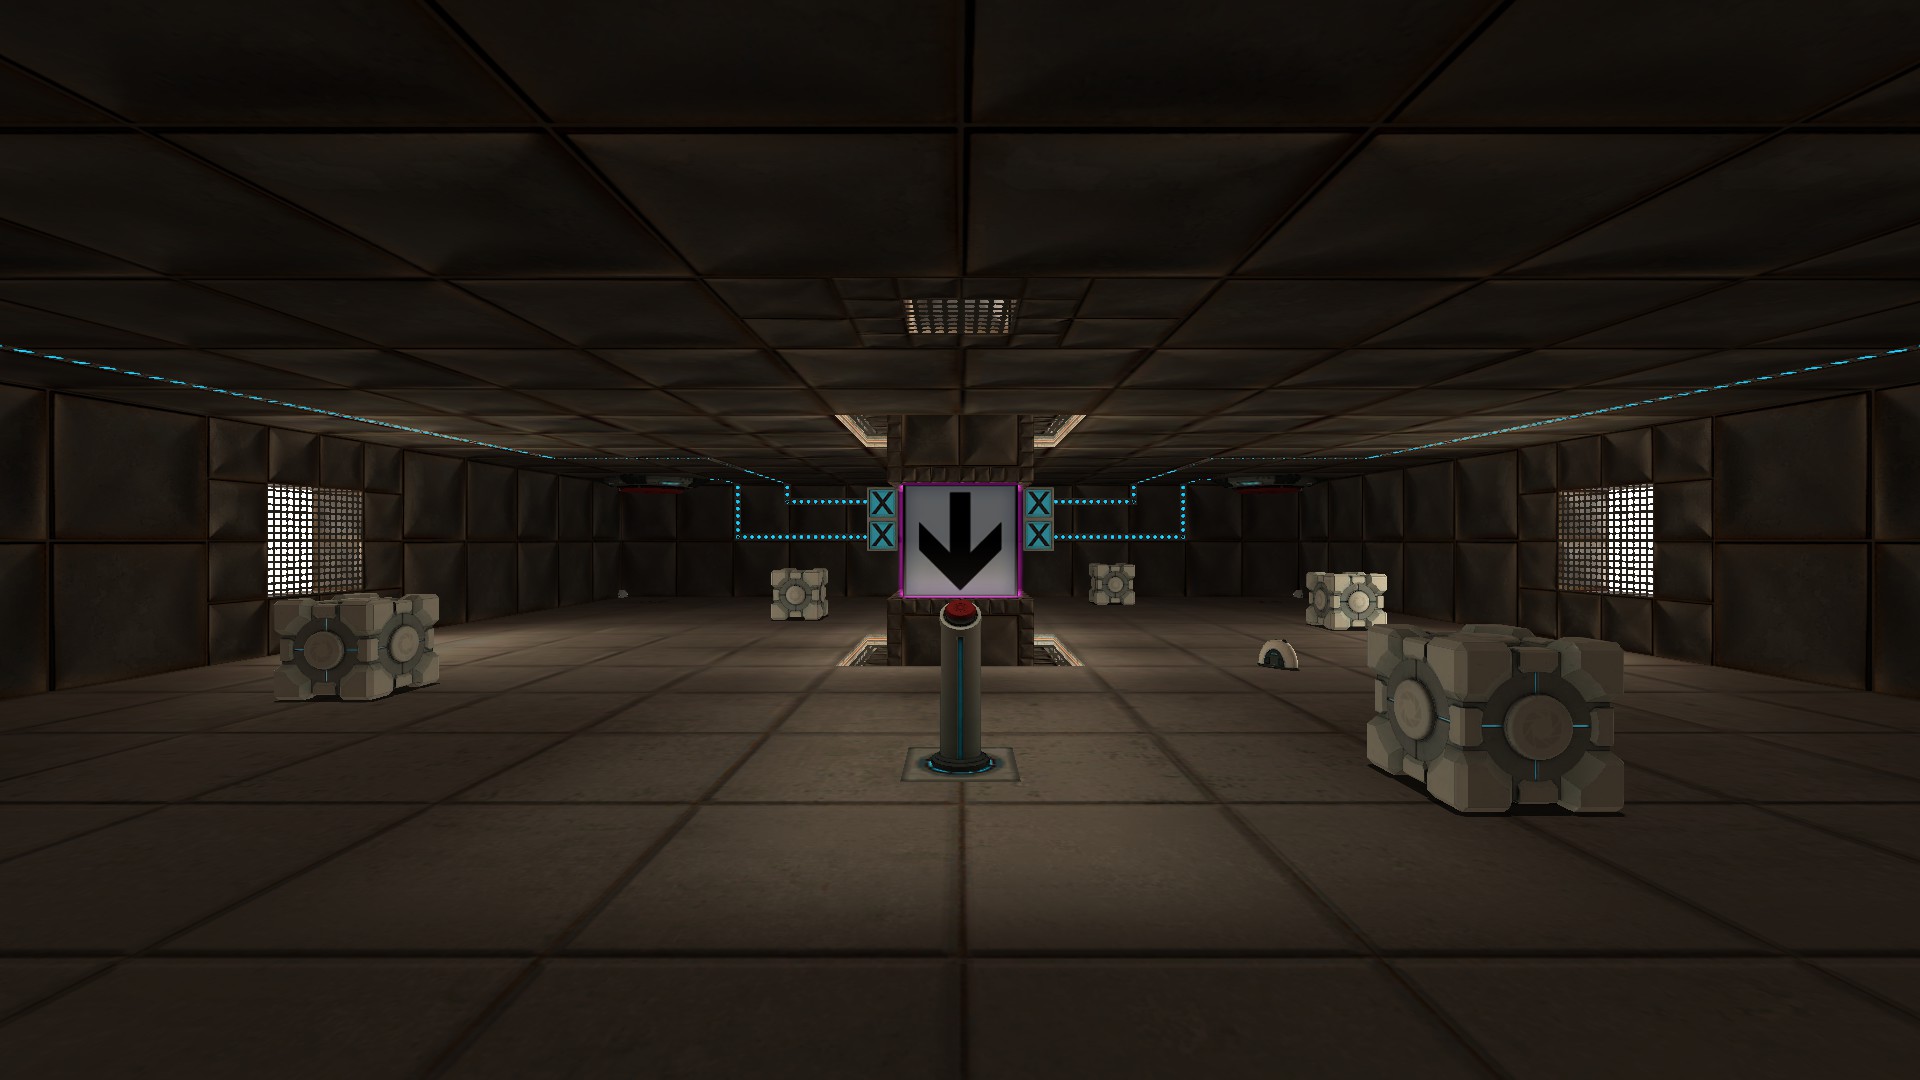 The first room has cubes, a sphere, and a radio about the floor, 4 buttons on the ceiling corners, and a big glowing down arrow in the middle, connected to a pedestal button.